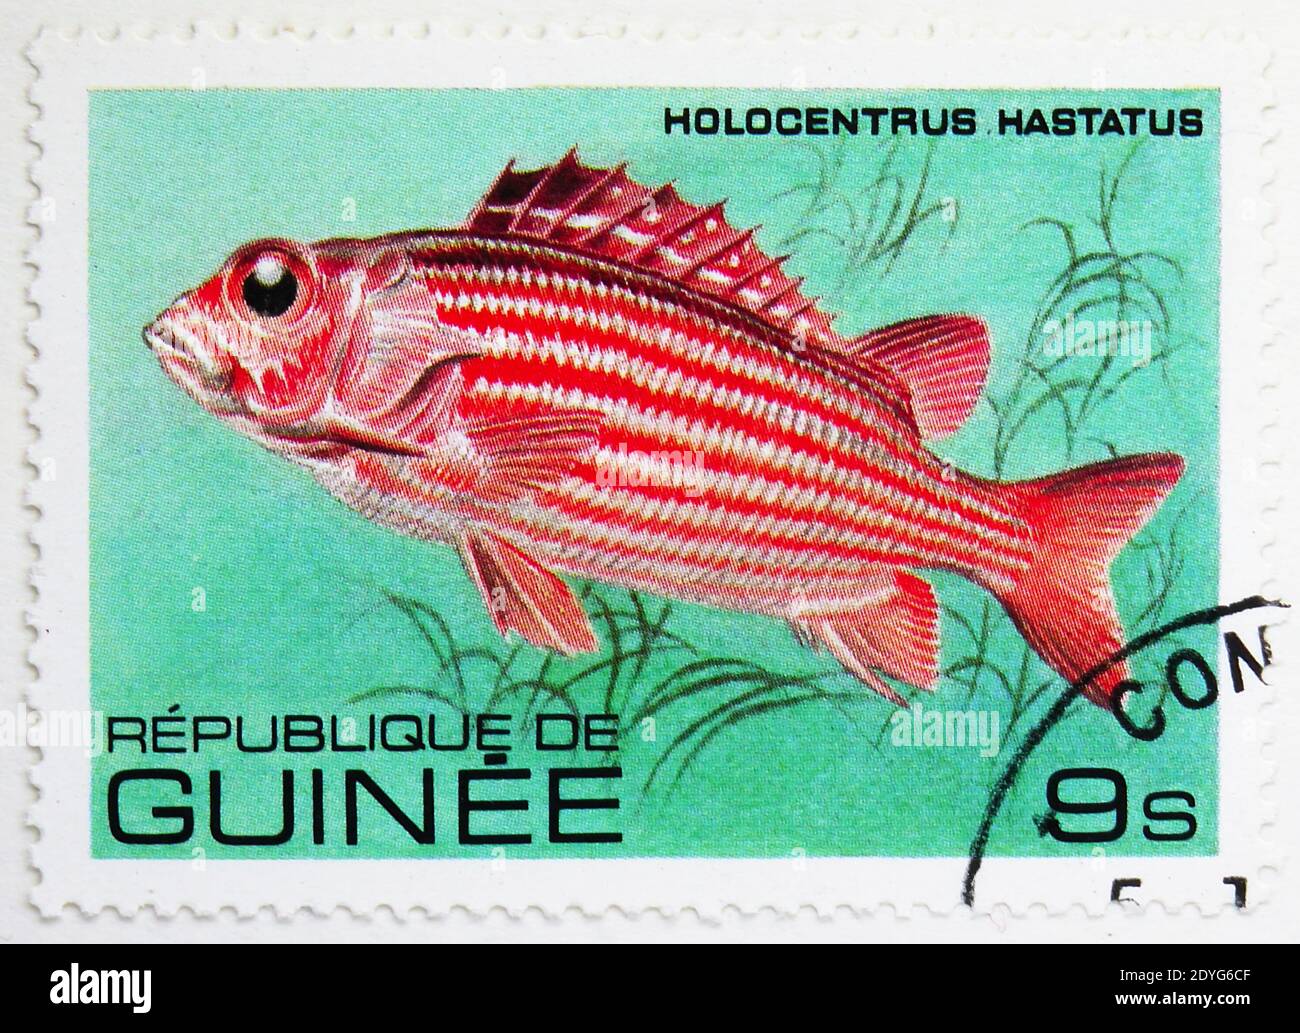 MOSCOW, RUSSIA - AUGUST 4, 2019: Postage stamp printed in Guinea shows Red Soldier Fish (Holocentrus hastatus), Fish serie, circa 1980 Stock Photo